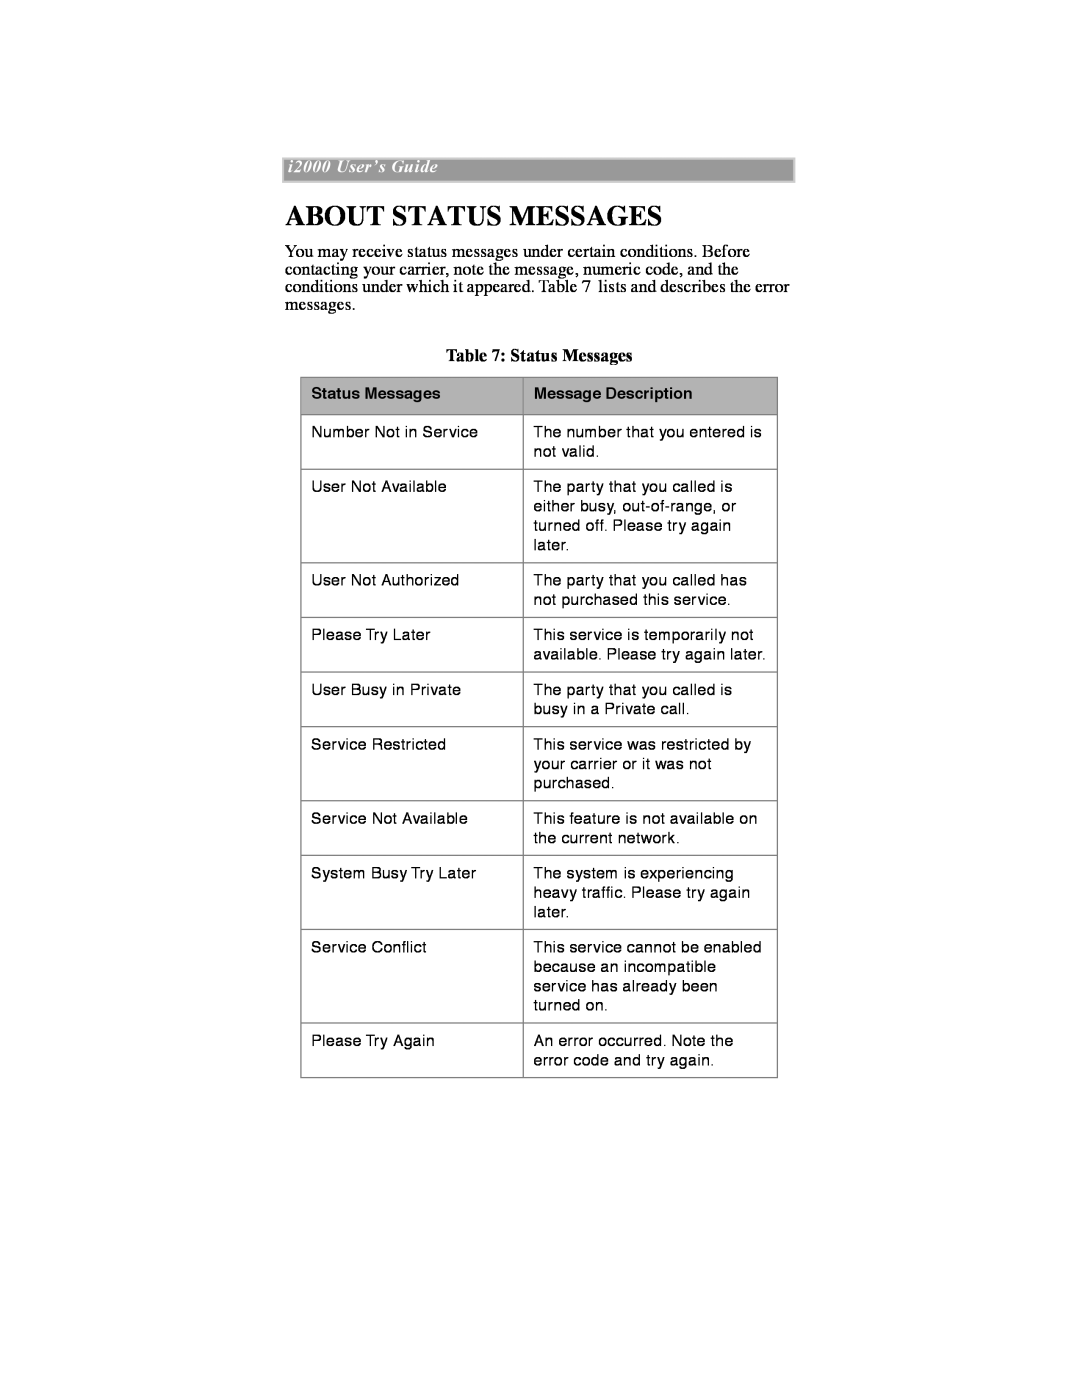 Motorola iDEN manual About Status Messages, i2000 UserÕs Guide 